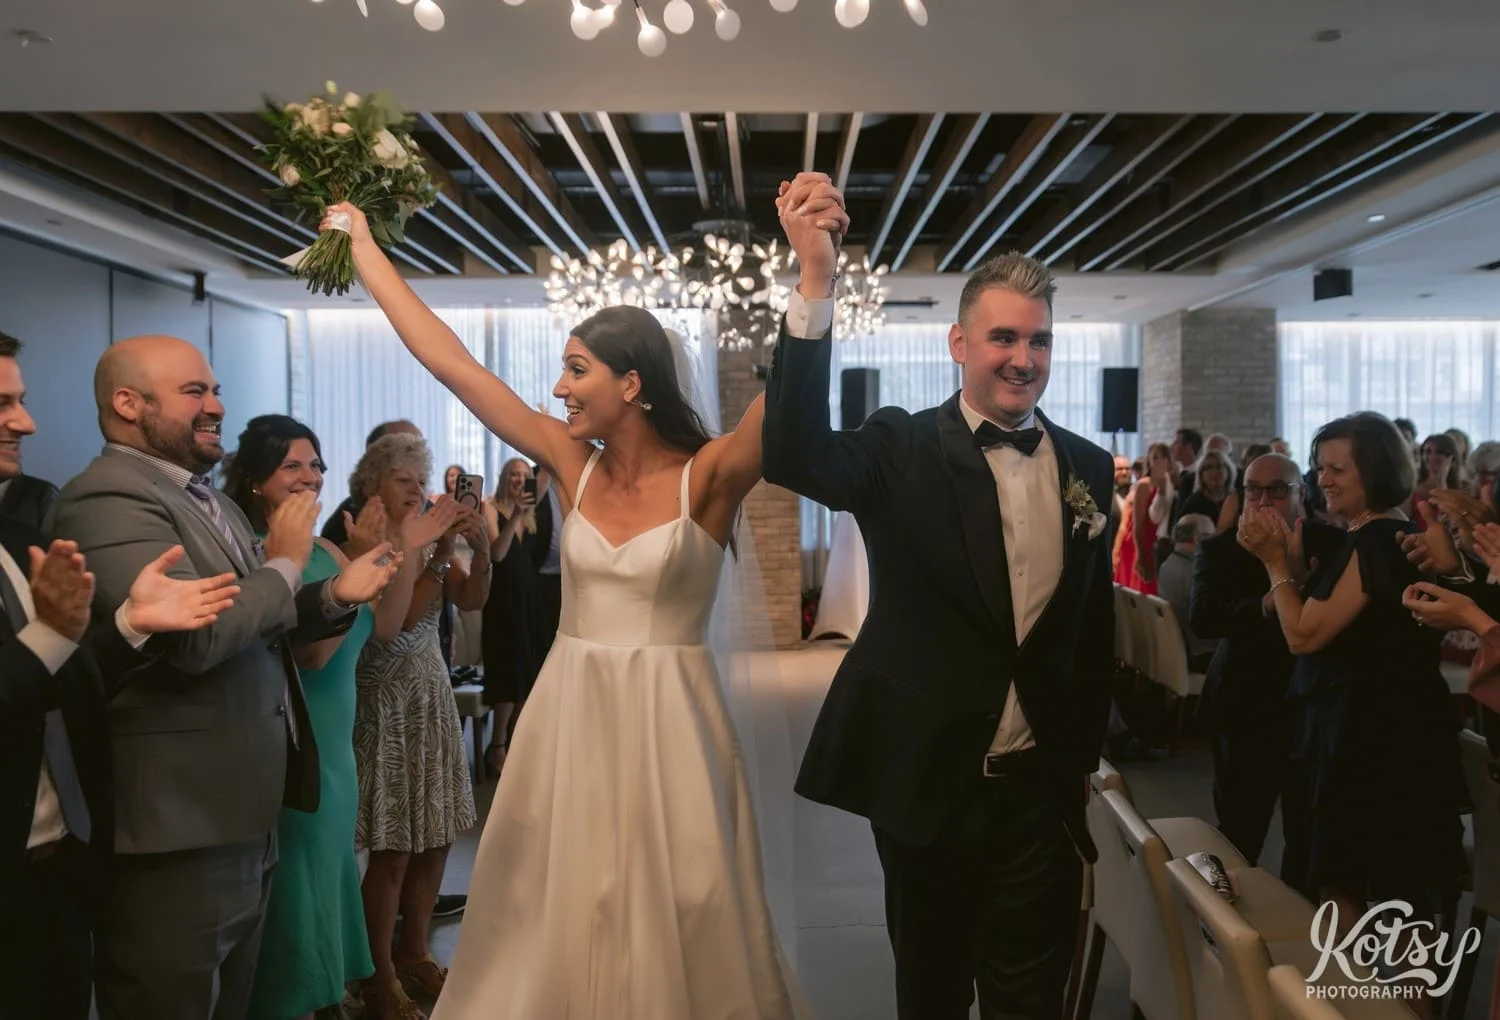 A bride and groom raise their hands in celebration as they walk back up the aisle at the end of their Village Loft wedding ceremonyin Toronto, Canada